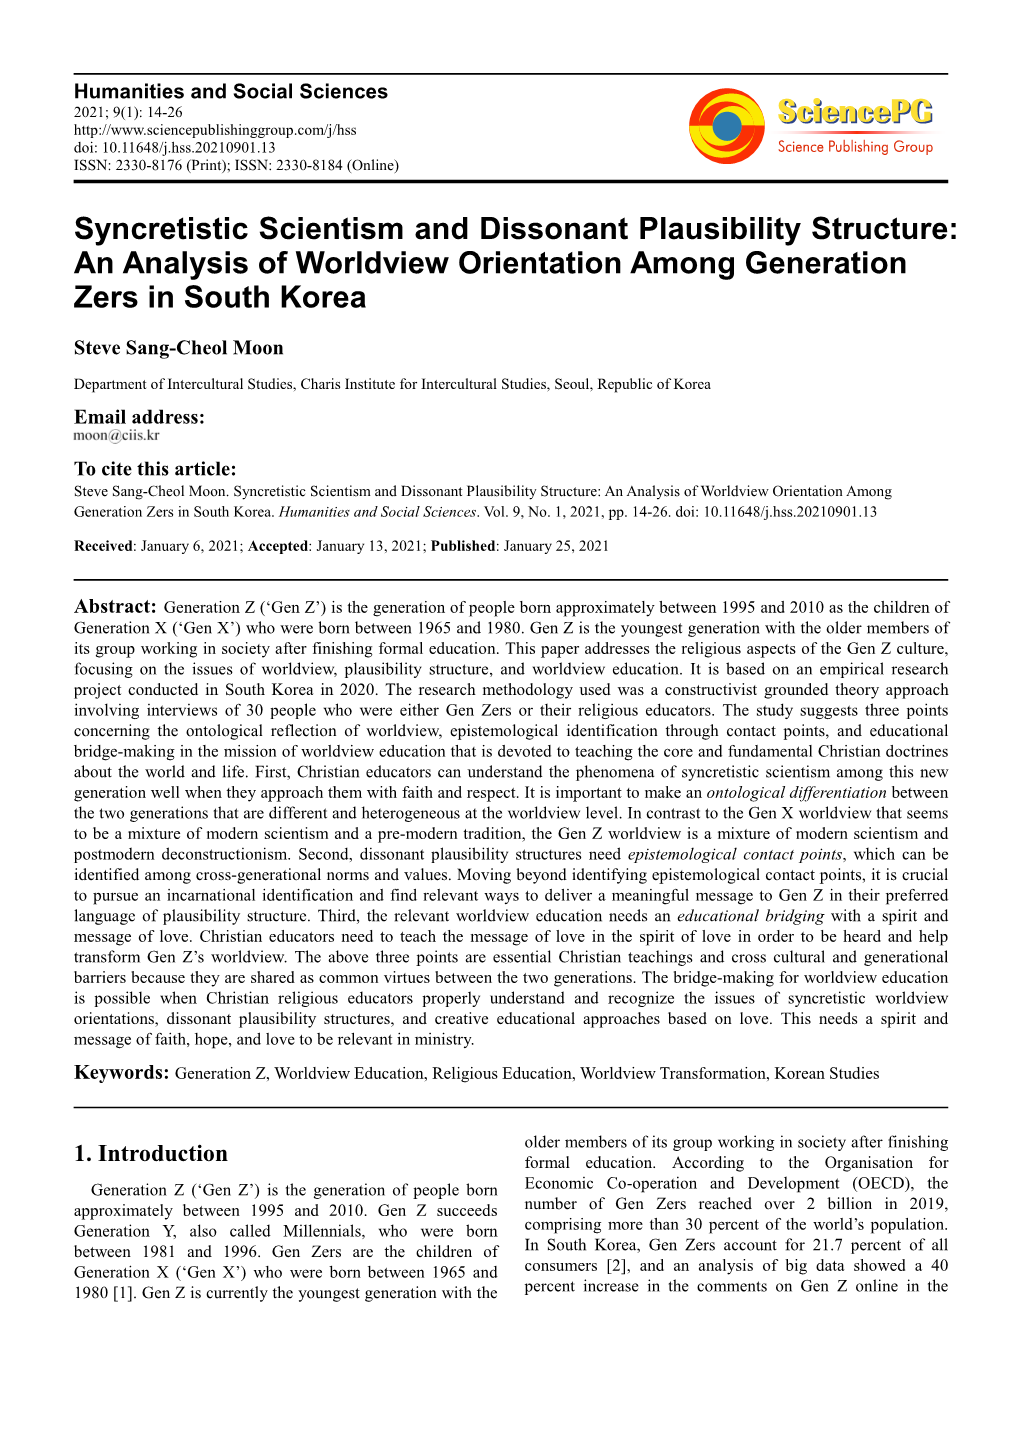 Syncretistic Scientism and Dissonant Plausibility Structure: an Analysis of Worldview Orientation Among Generation Zers in South Korea